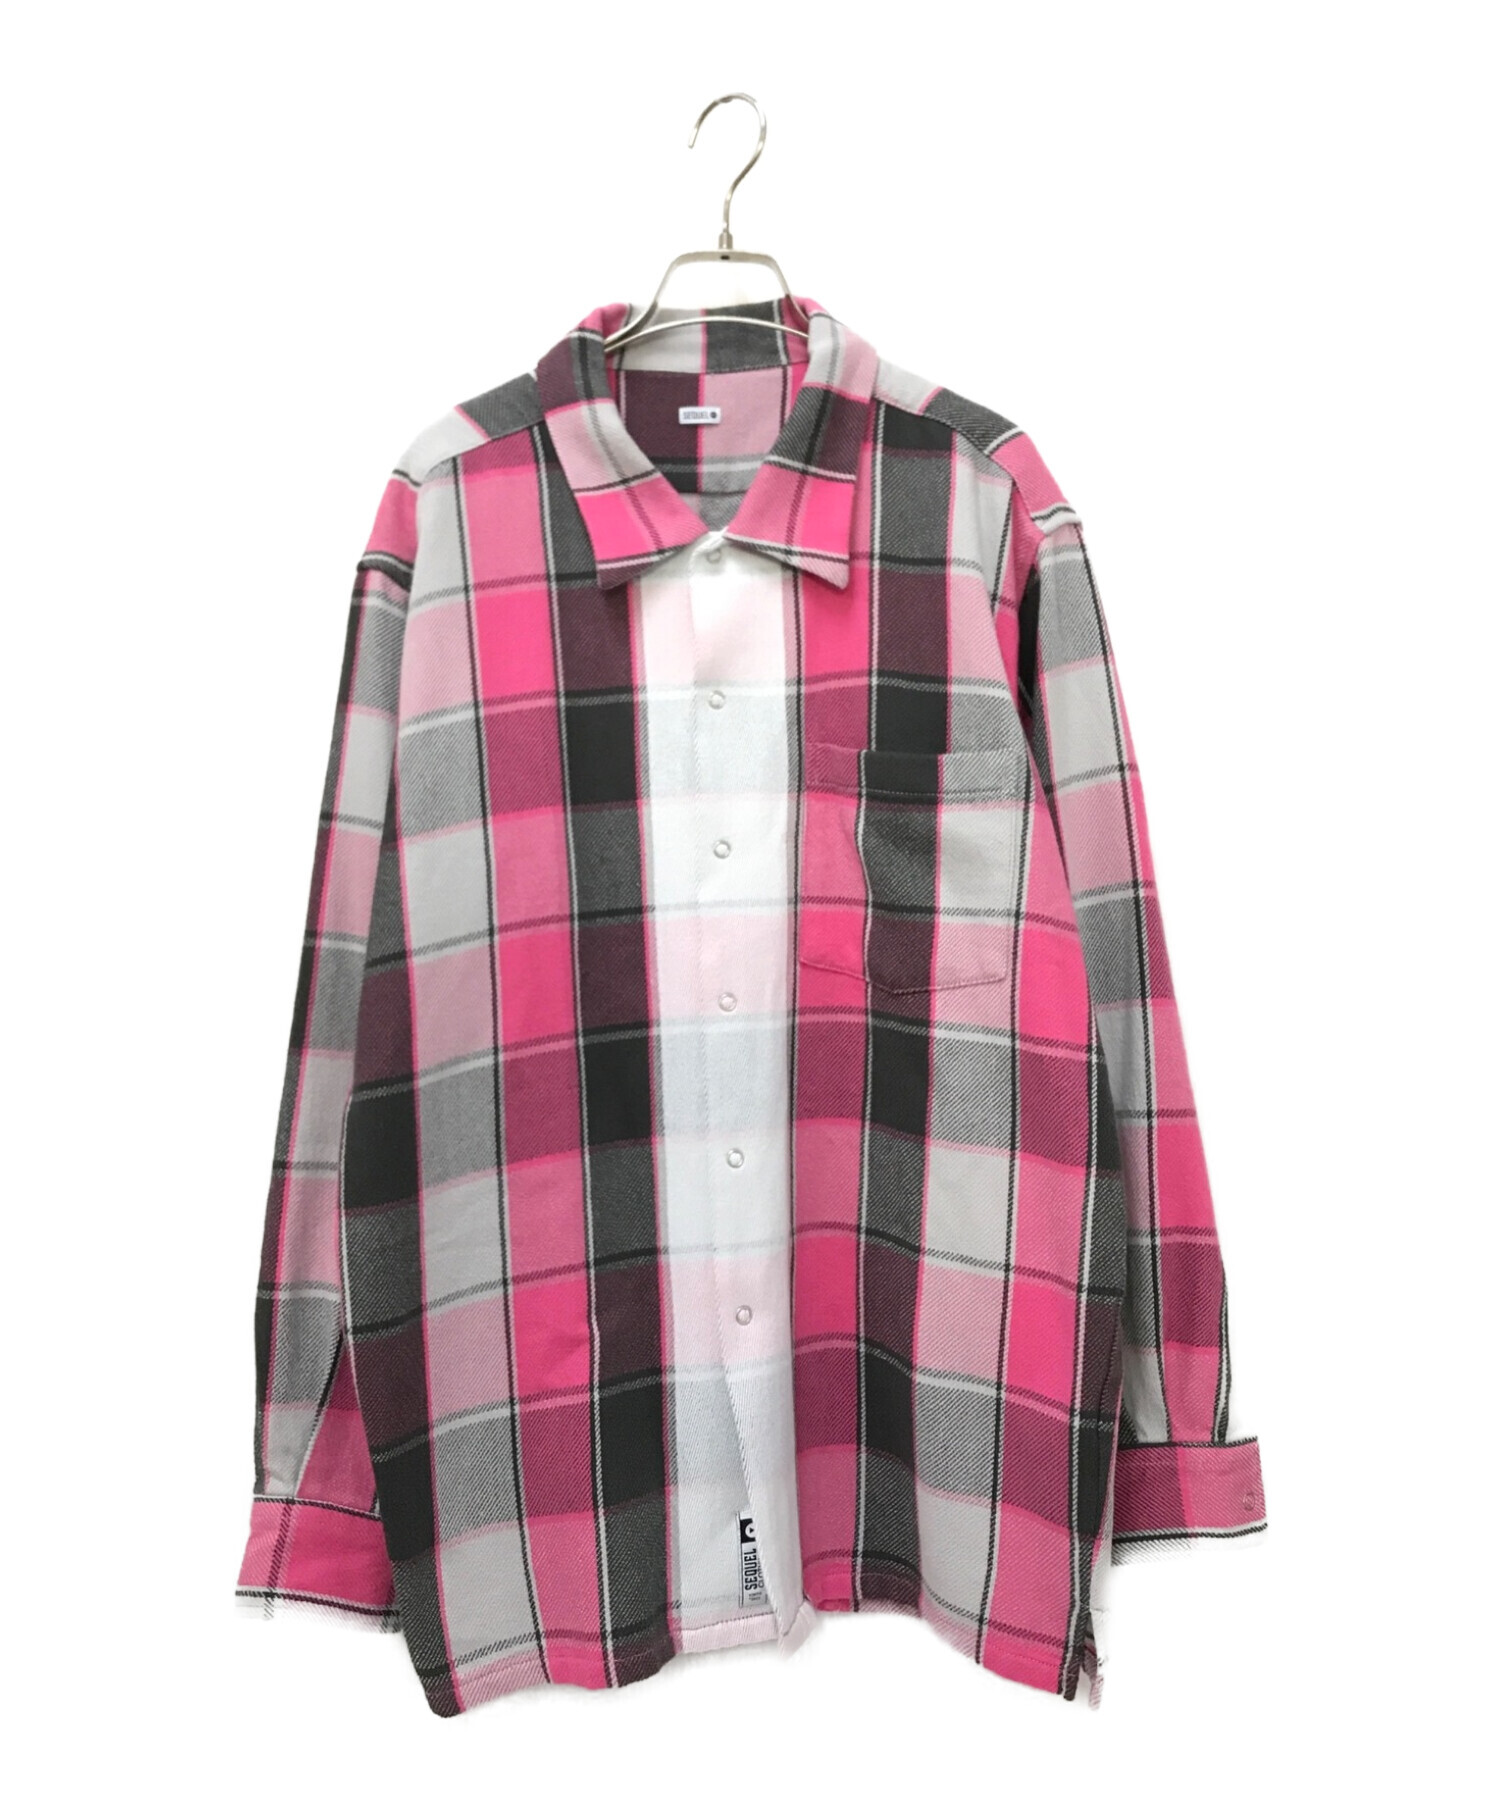 【REMI RELIEF/レミレリーフ】Check Shirt★ピンク